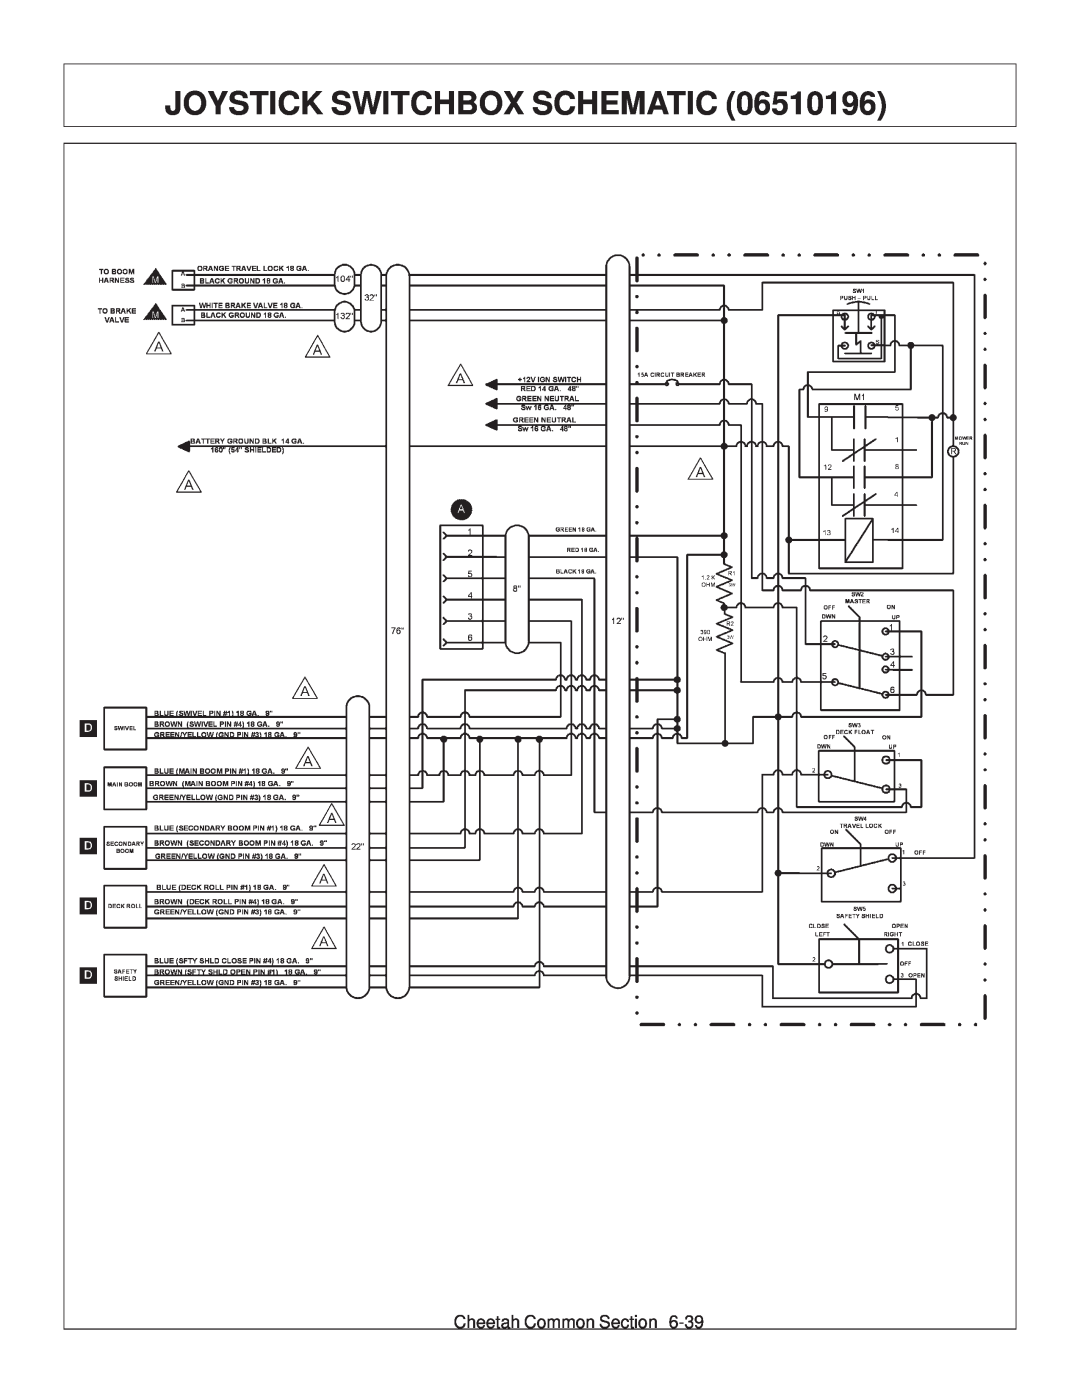 Tiger Products Co., Ltd JD 5093E, JD 5101E, JD 5083E manual Joystick Switchbox Schematic, Cheetah Common Section 